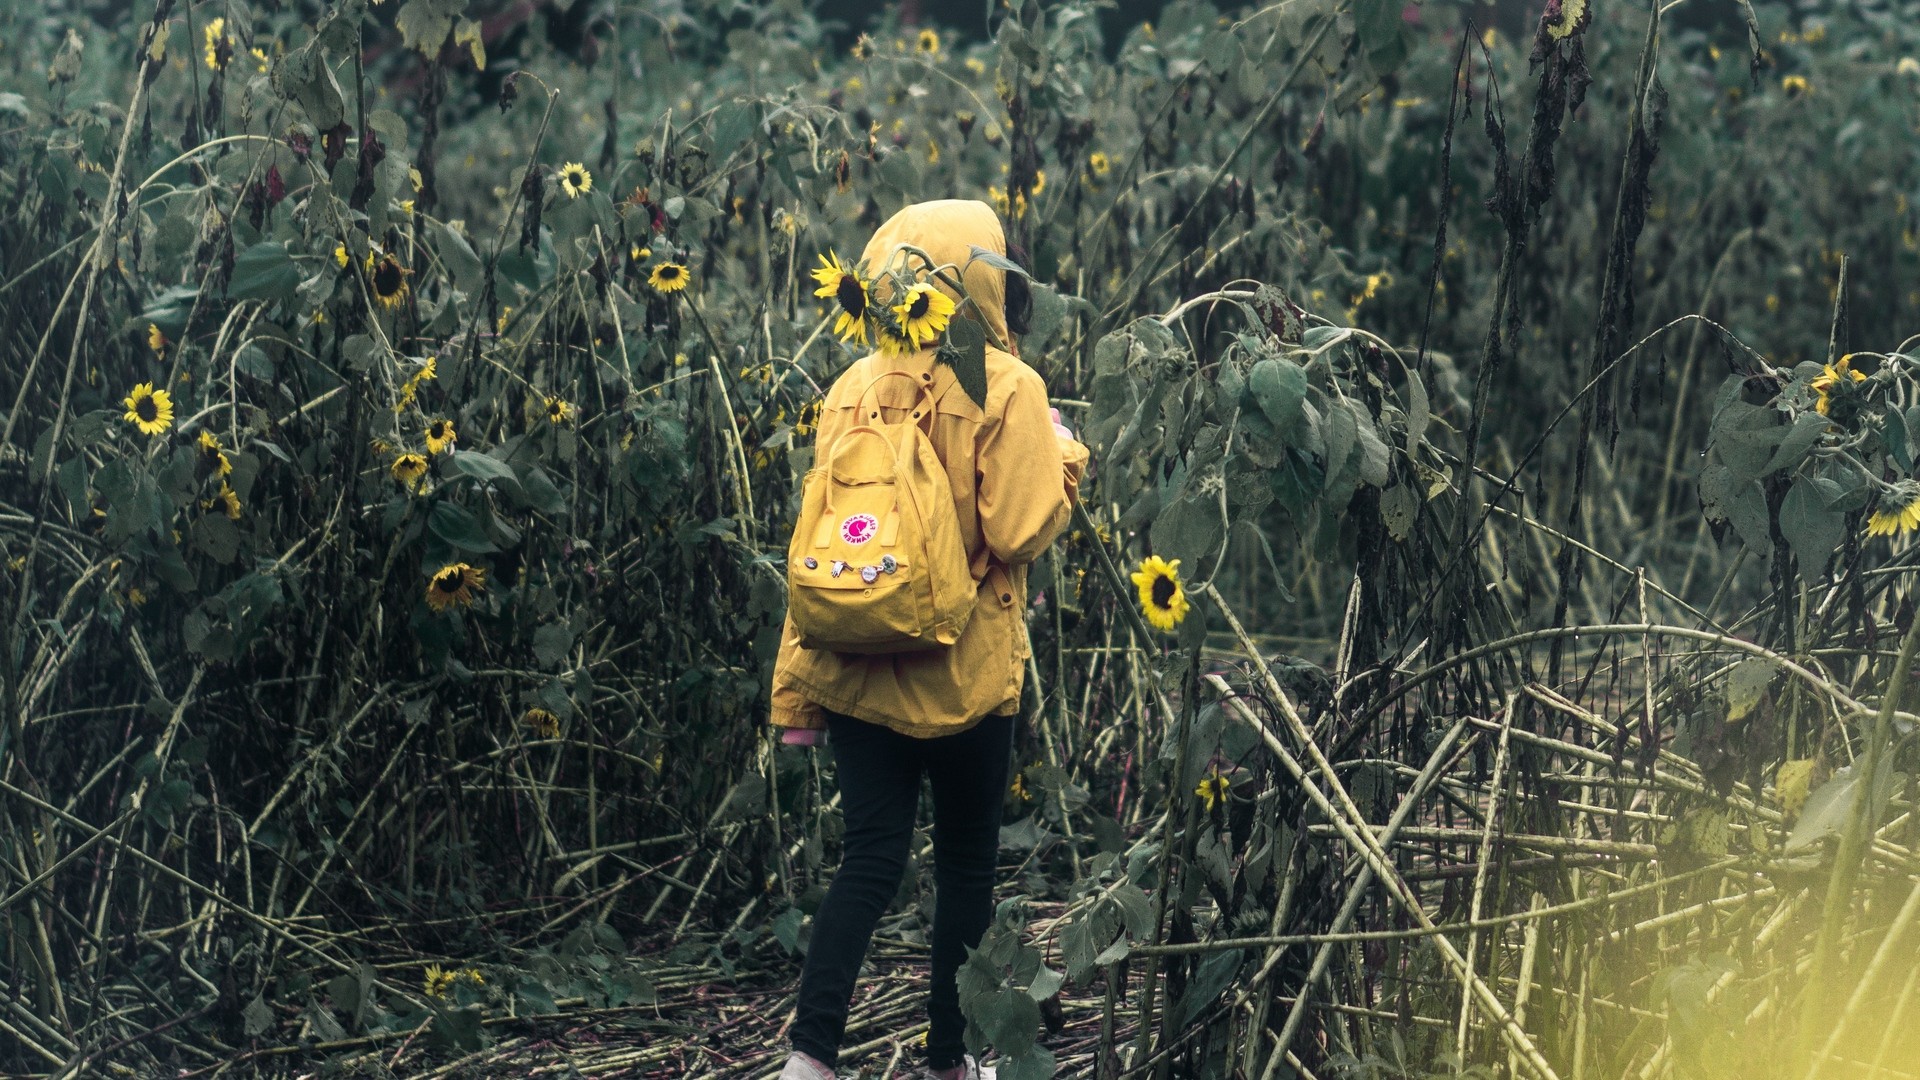 1920x1080 wallpapers: man, field, flowers, backpack, cloudy (image)